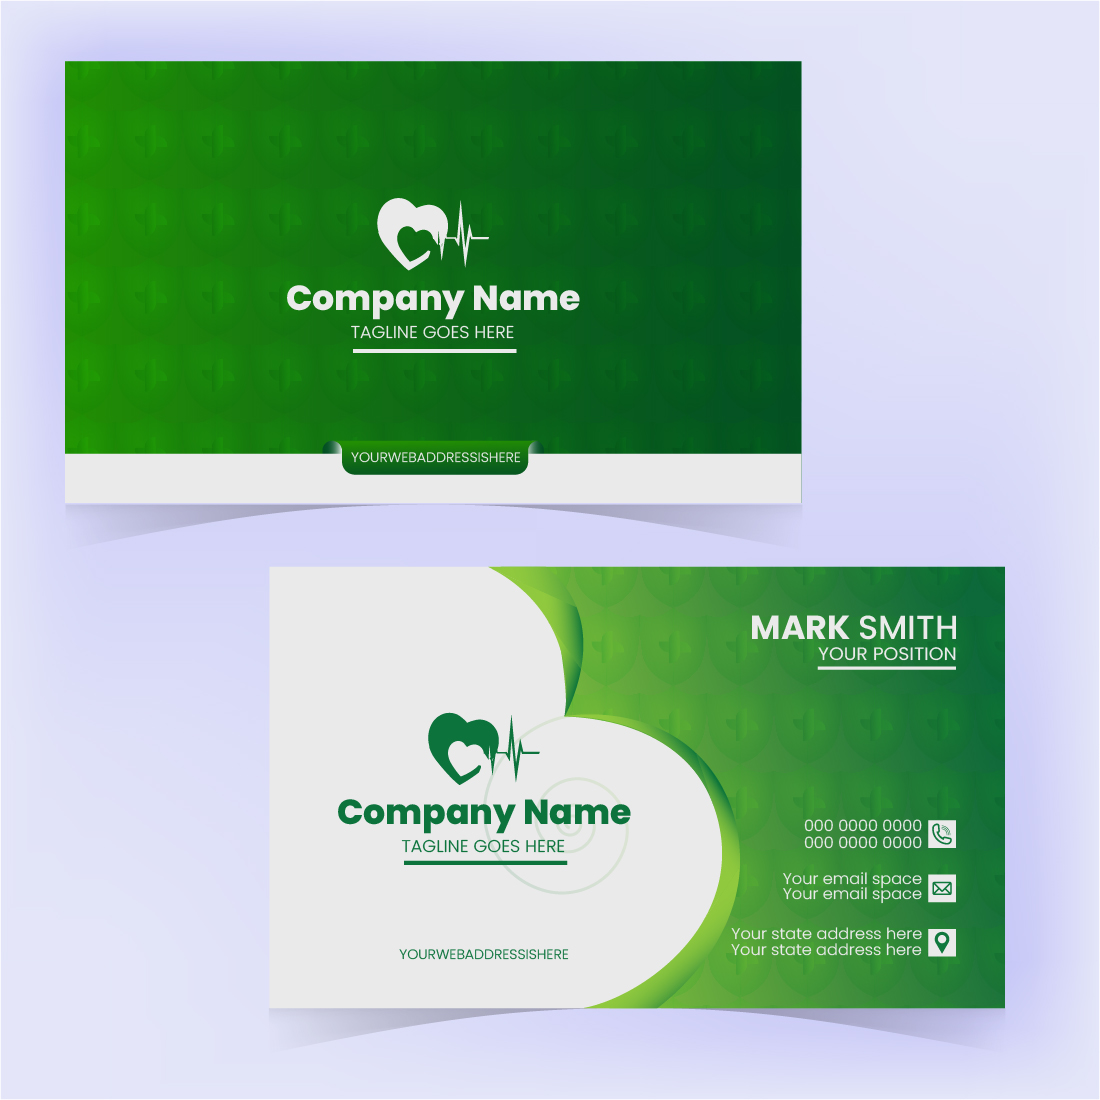 medical Business Card Template cover image.